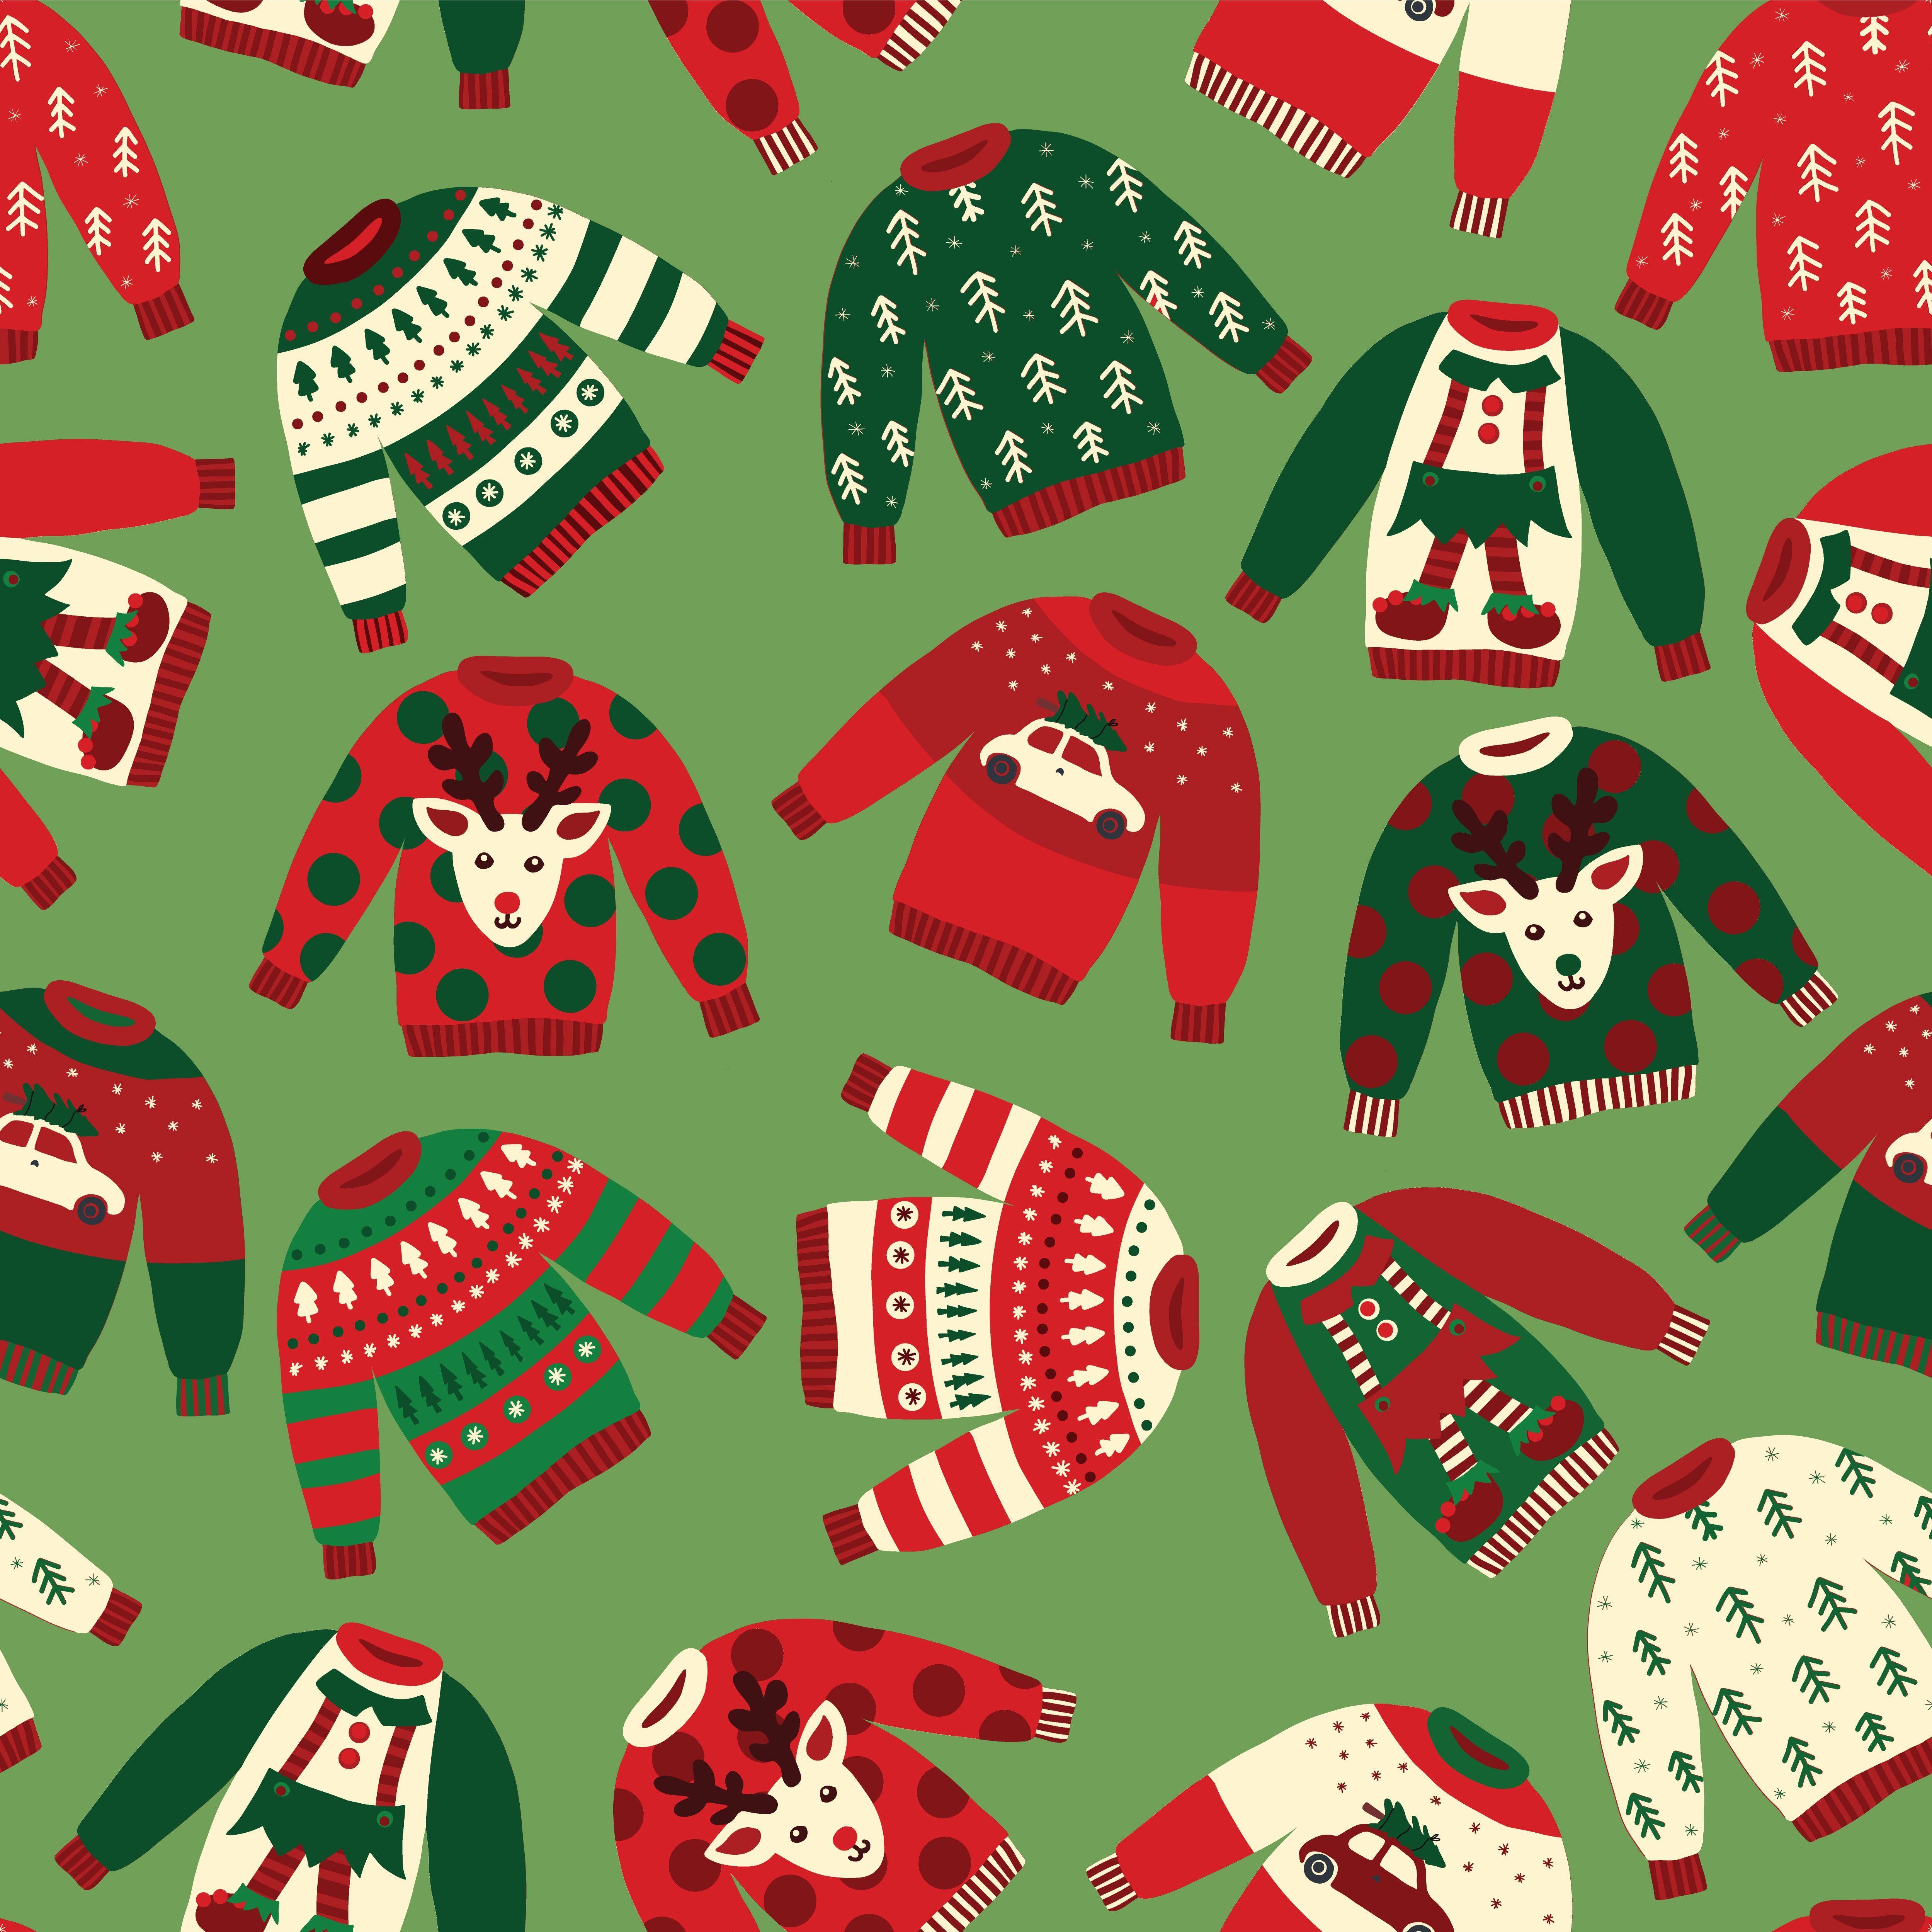 Albums 90+ Wallpaper Christmas Sweater Wallpaper Tumblr Excellent